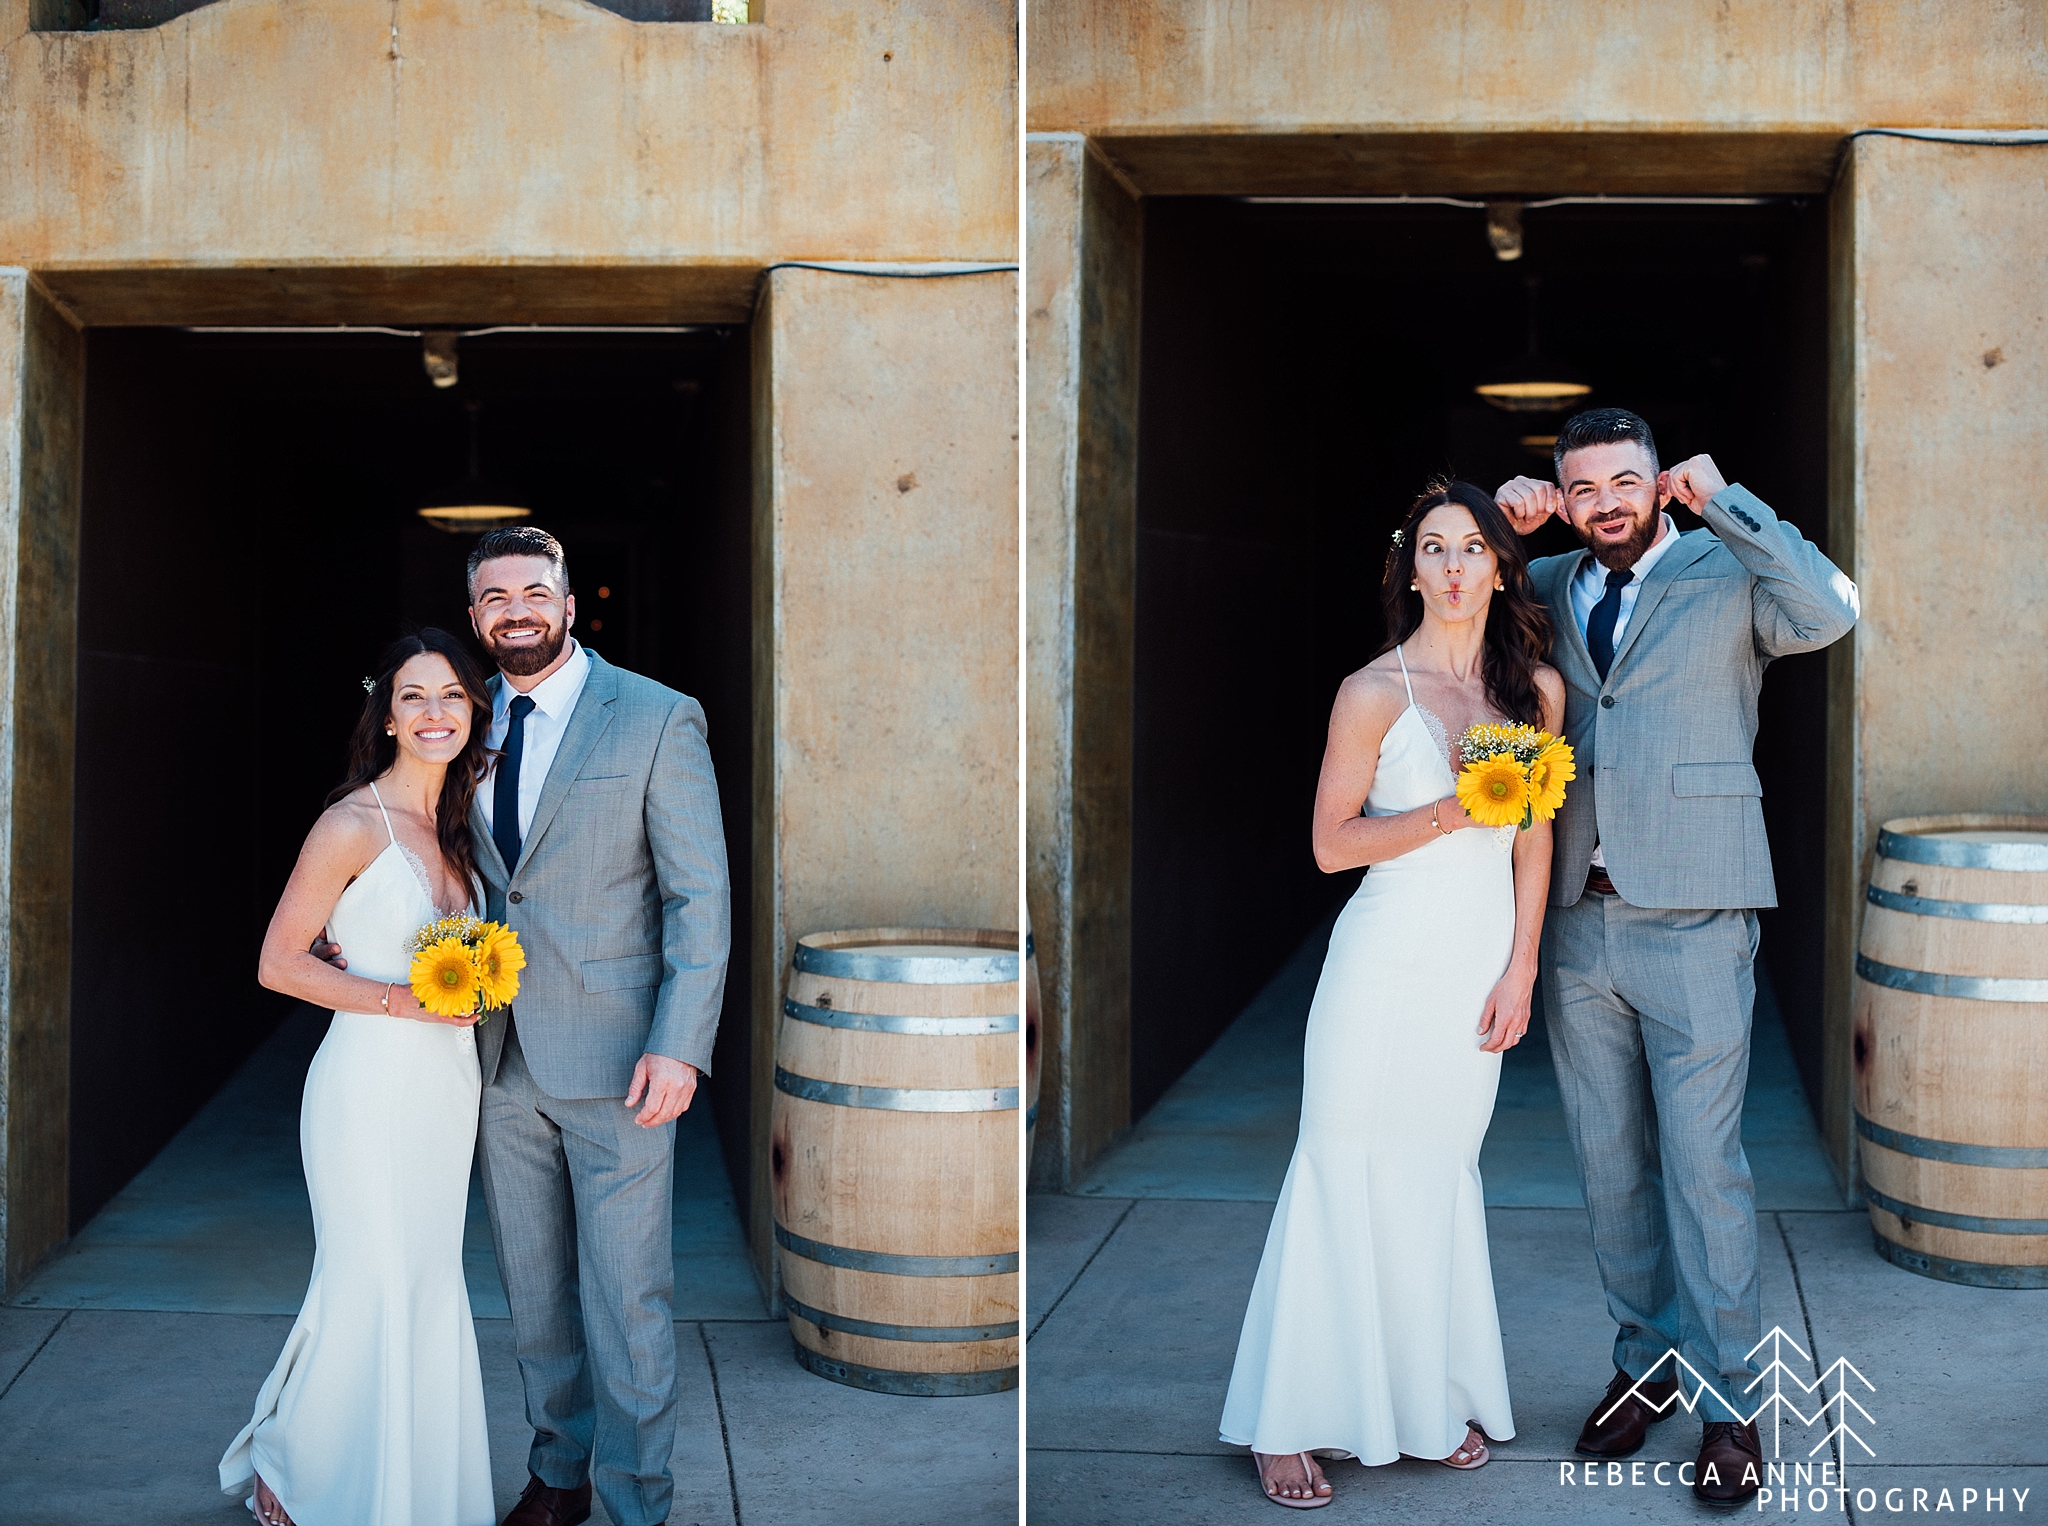 Swiftwater Cellars Elopement,Swiftwater Cellars Wedding,Swiftwater Cellars Elopement Photos,Swiftwater Cellars Wedding Photos,Seattle Elopement Photographer,Tacoma Elopement Photographer,Washington Elopement Photographer,PNW Elopement Photographer,Washigton Elopement Photos,